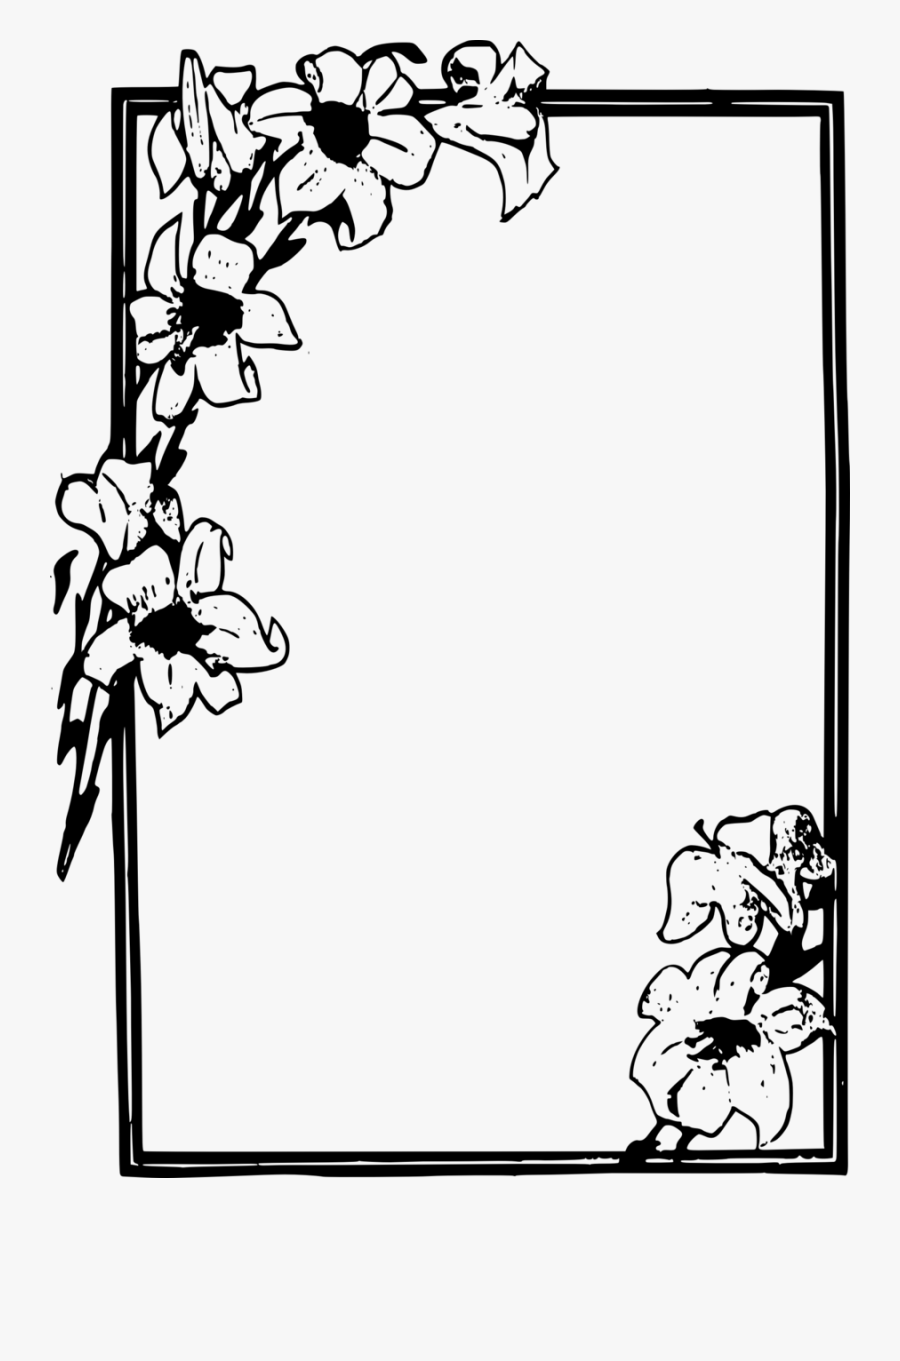 Simple Flower Frame Clipart Picture Frames Flower Clip - Flower Frame Clipart Black And White, Transparent Clipart